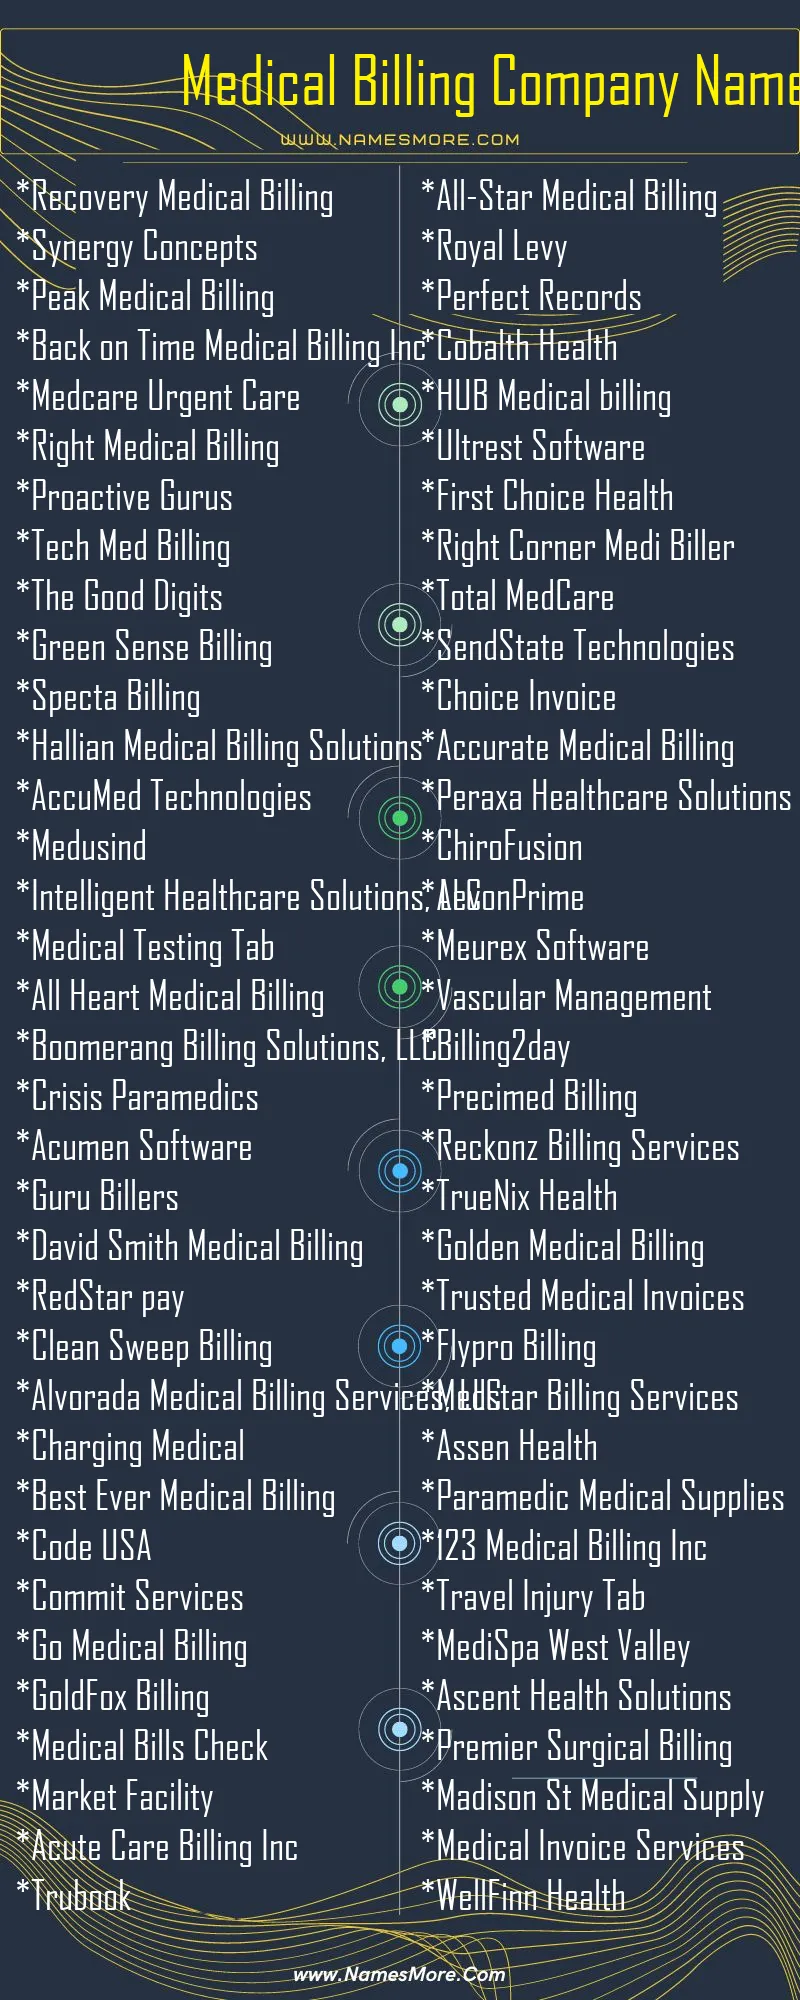 Medical Billing Company Names List Infographic